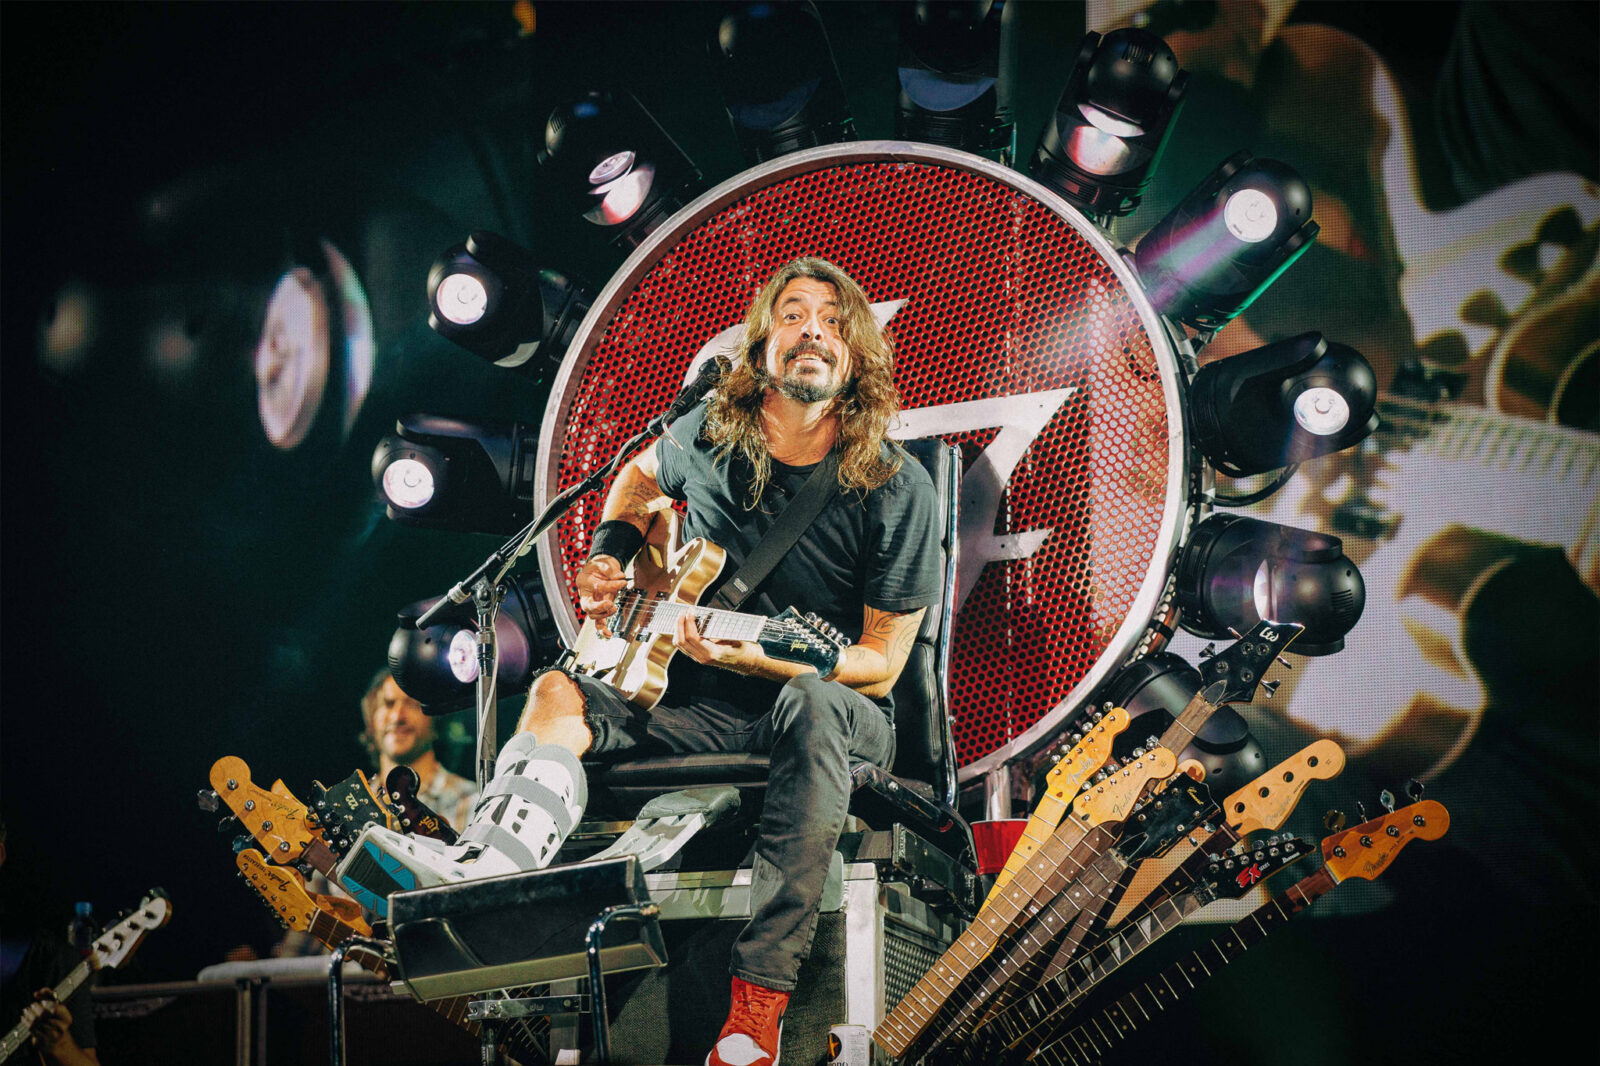 Dave Grohl of Foo Fighters photographed by Niña Sandejas